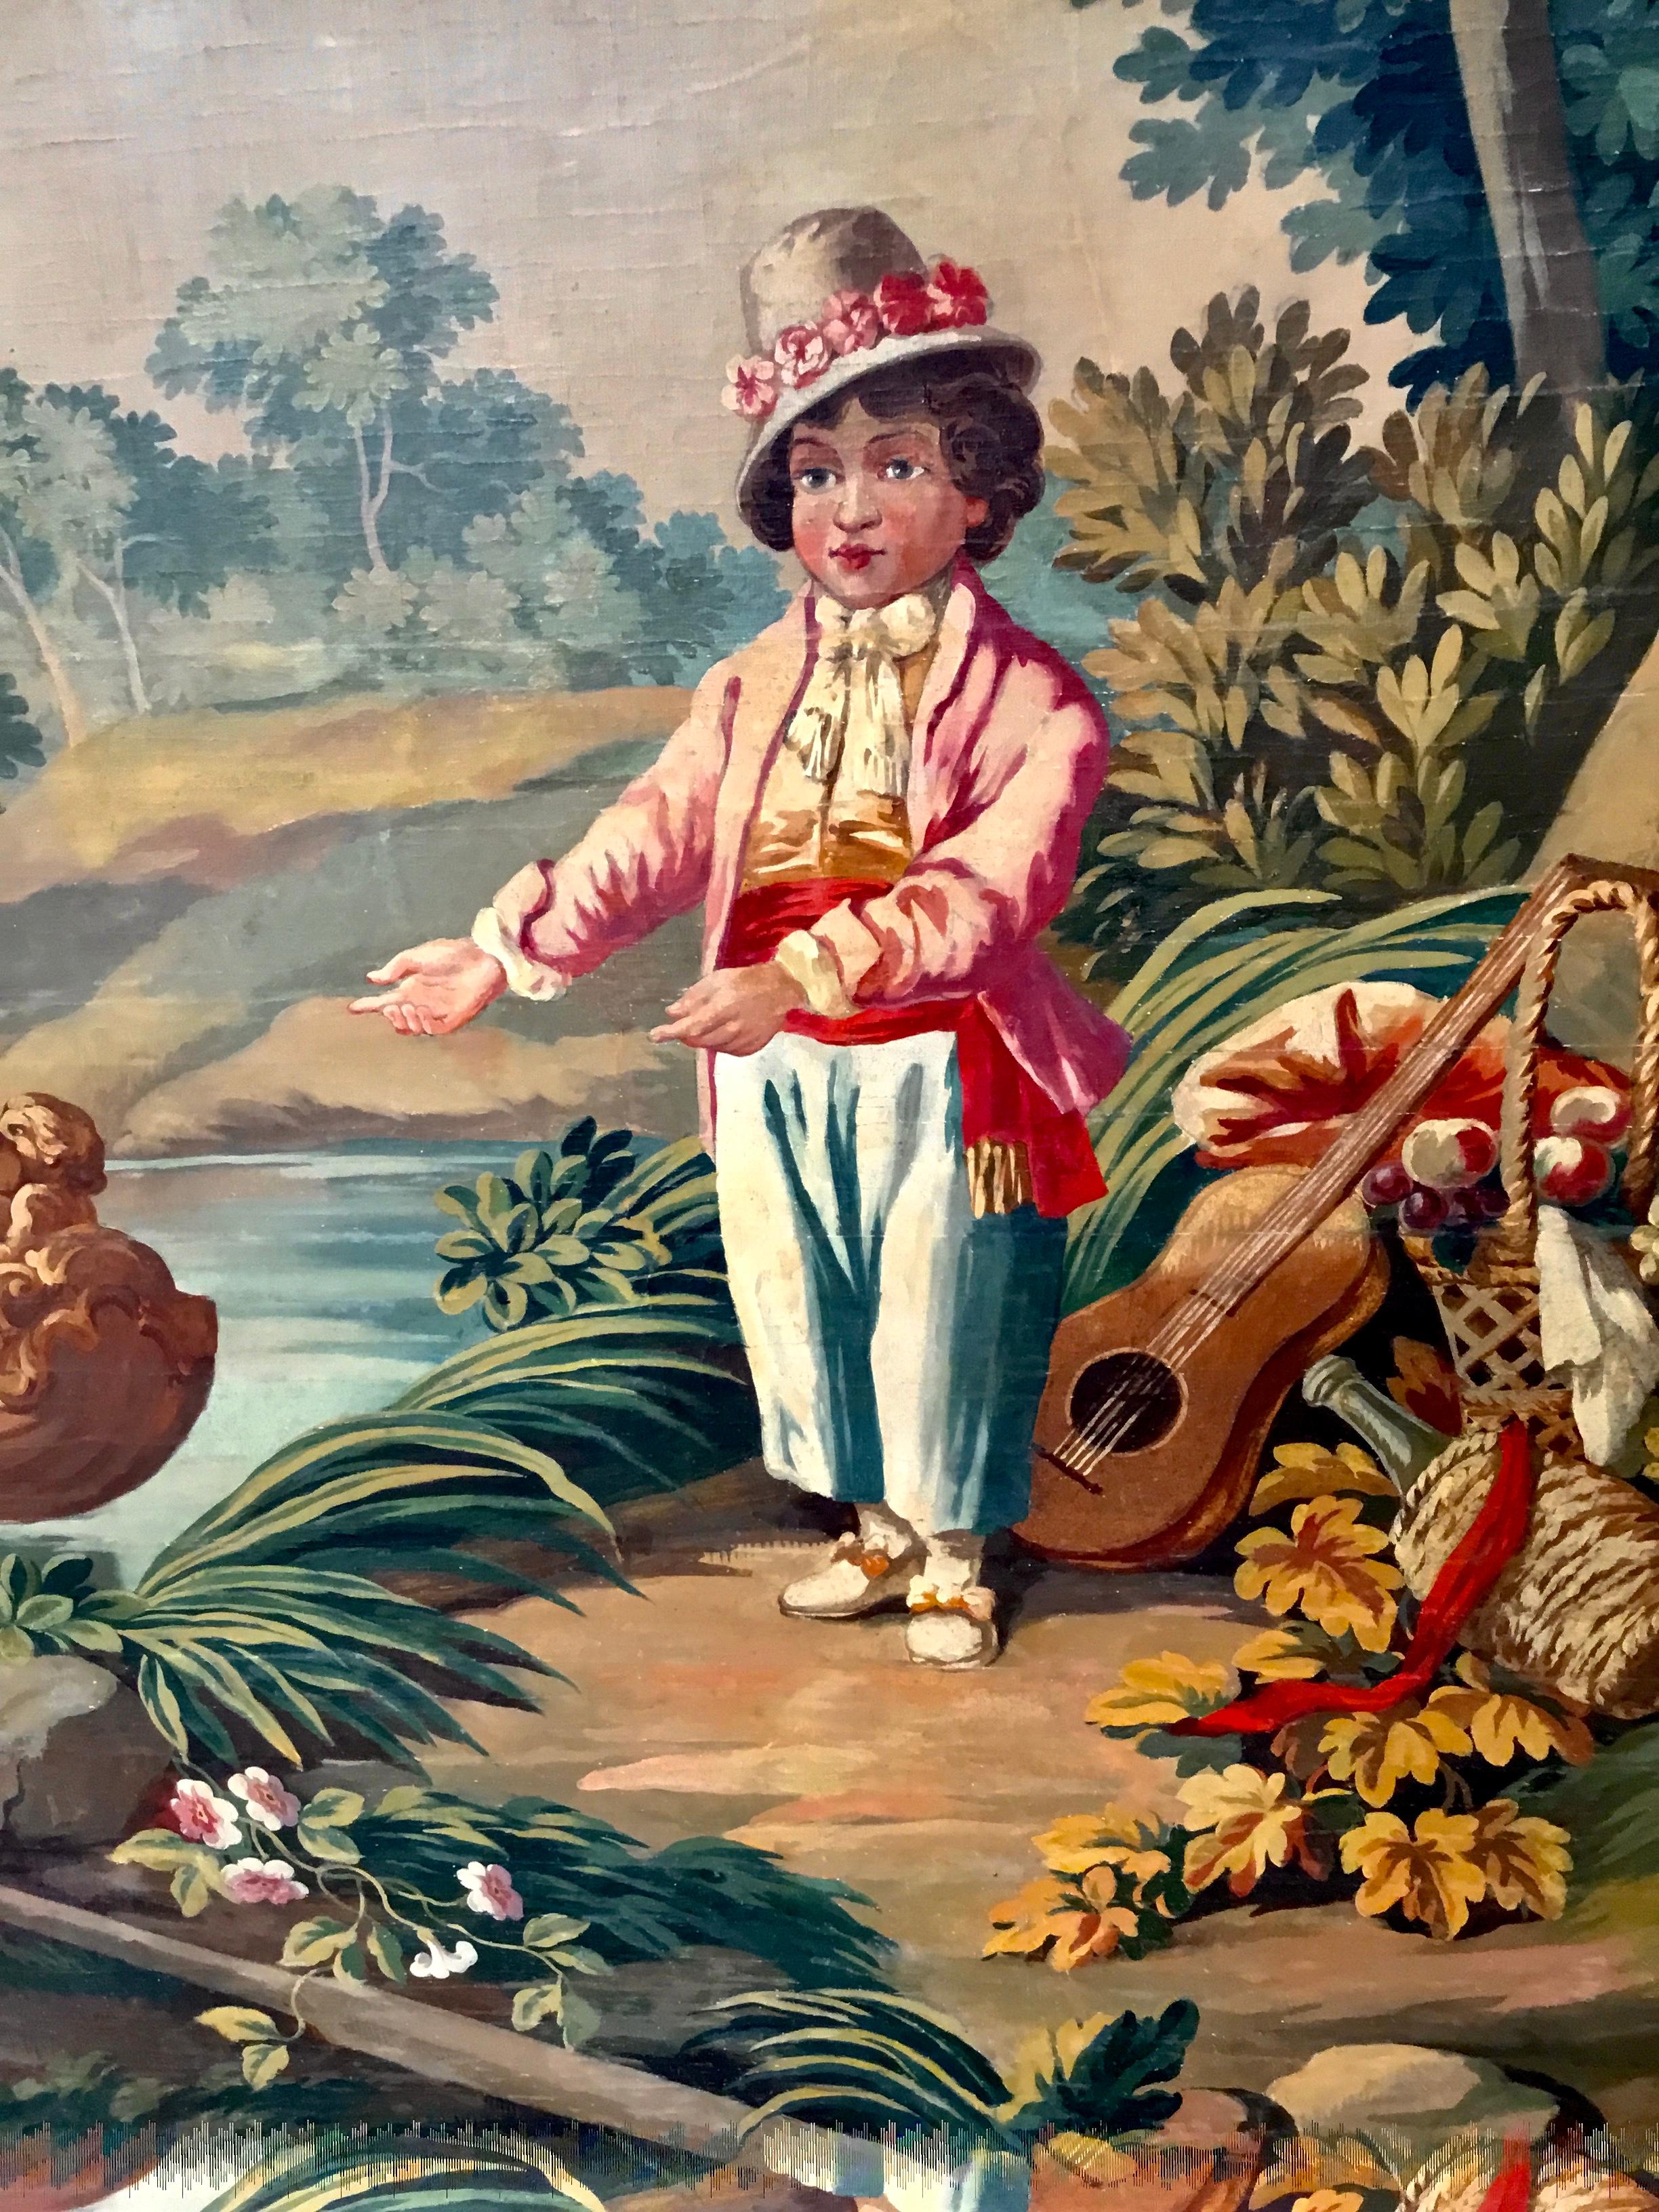 Large scale superb paintings of children in a garden setting. One is tending a lamb and the
Other with a musical instrument. Good retention of color and no restorations. Nicely custom
Framed in a black frame with a gilt liner. Great for large